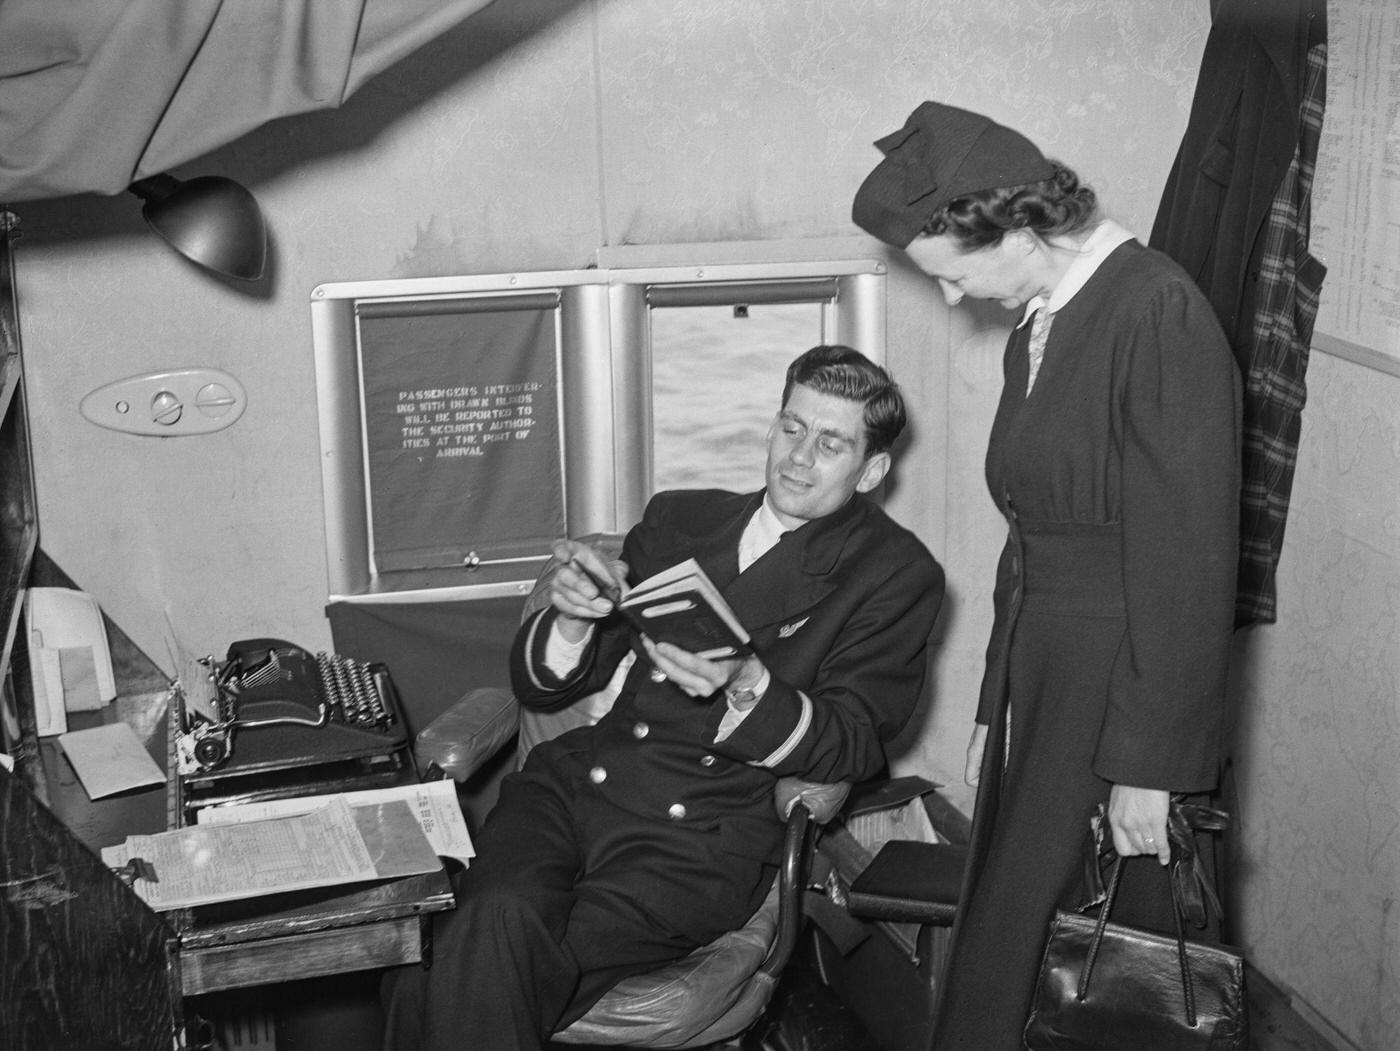 Purser K Everall is assisting a female passenger with a passport query aboard a British Overseas Airways Corporation (BOAC) flying boat flight from England during World War II on 31st August 1942, while aboard the plane.